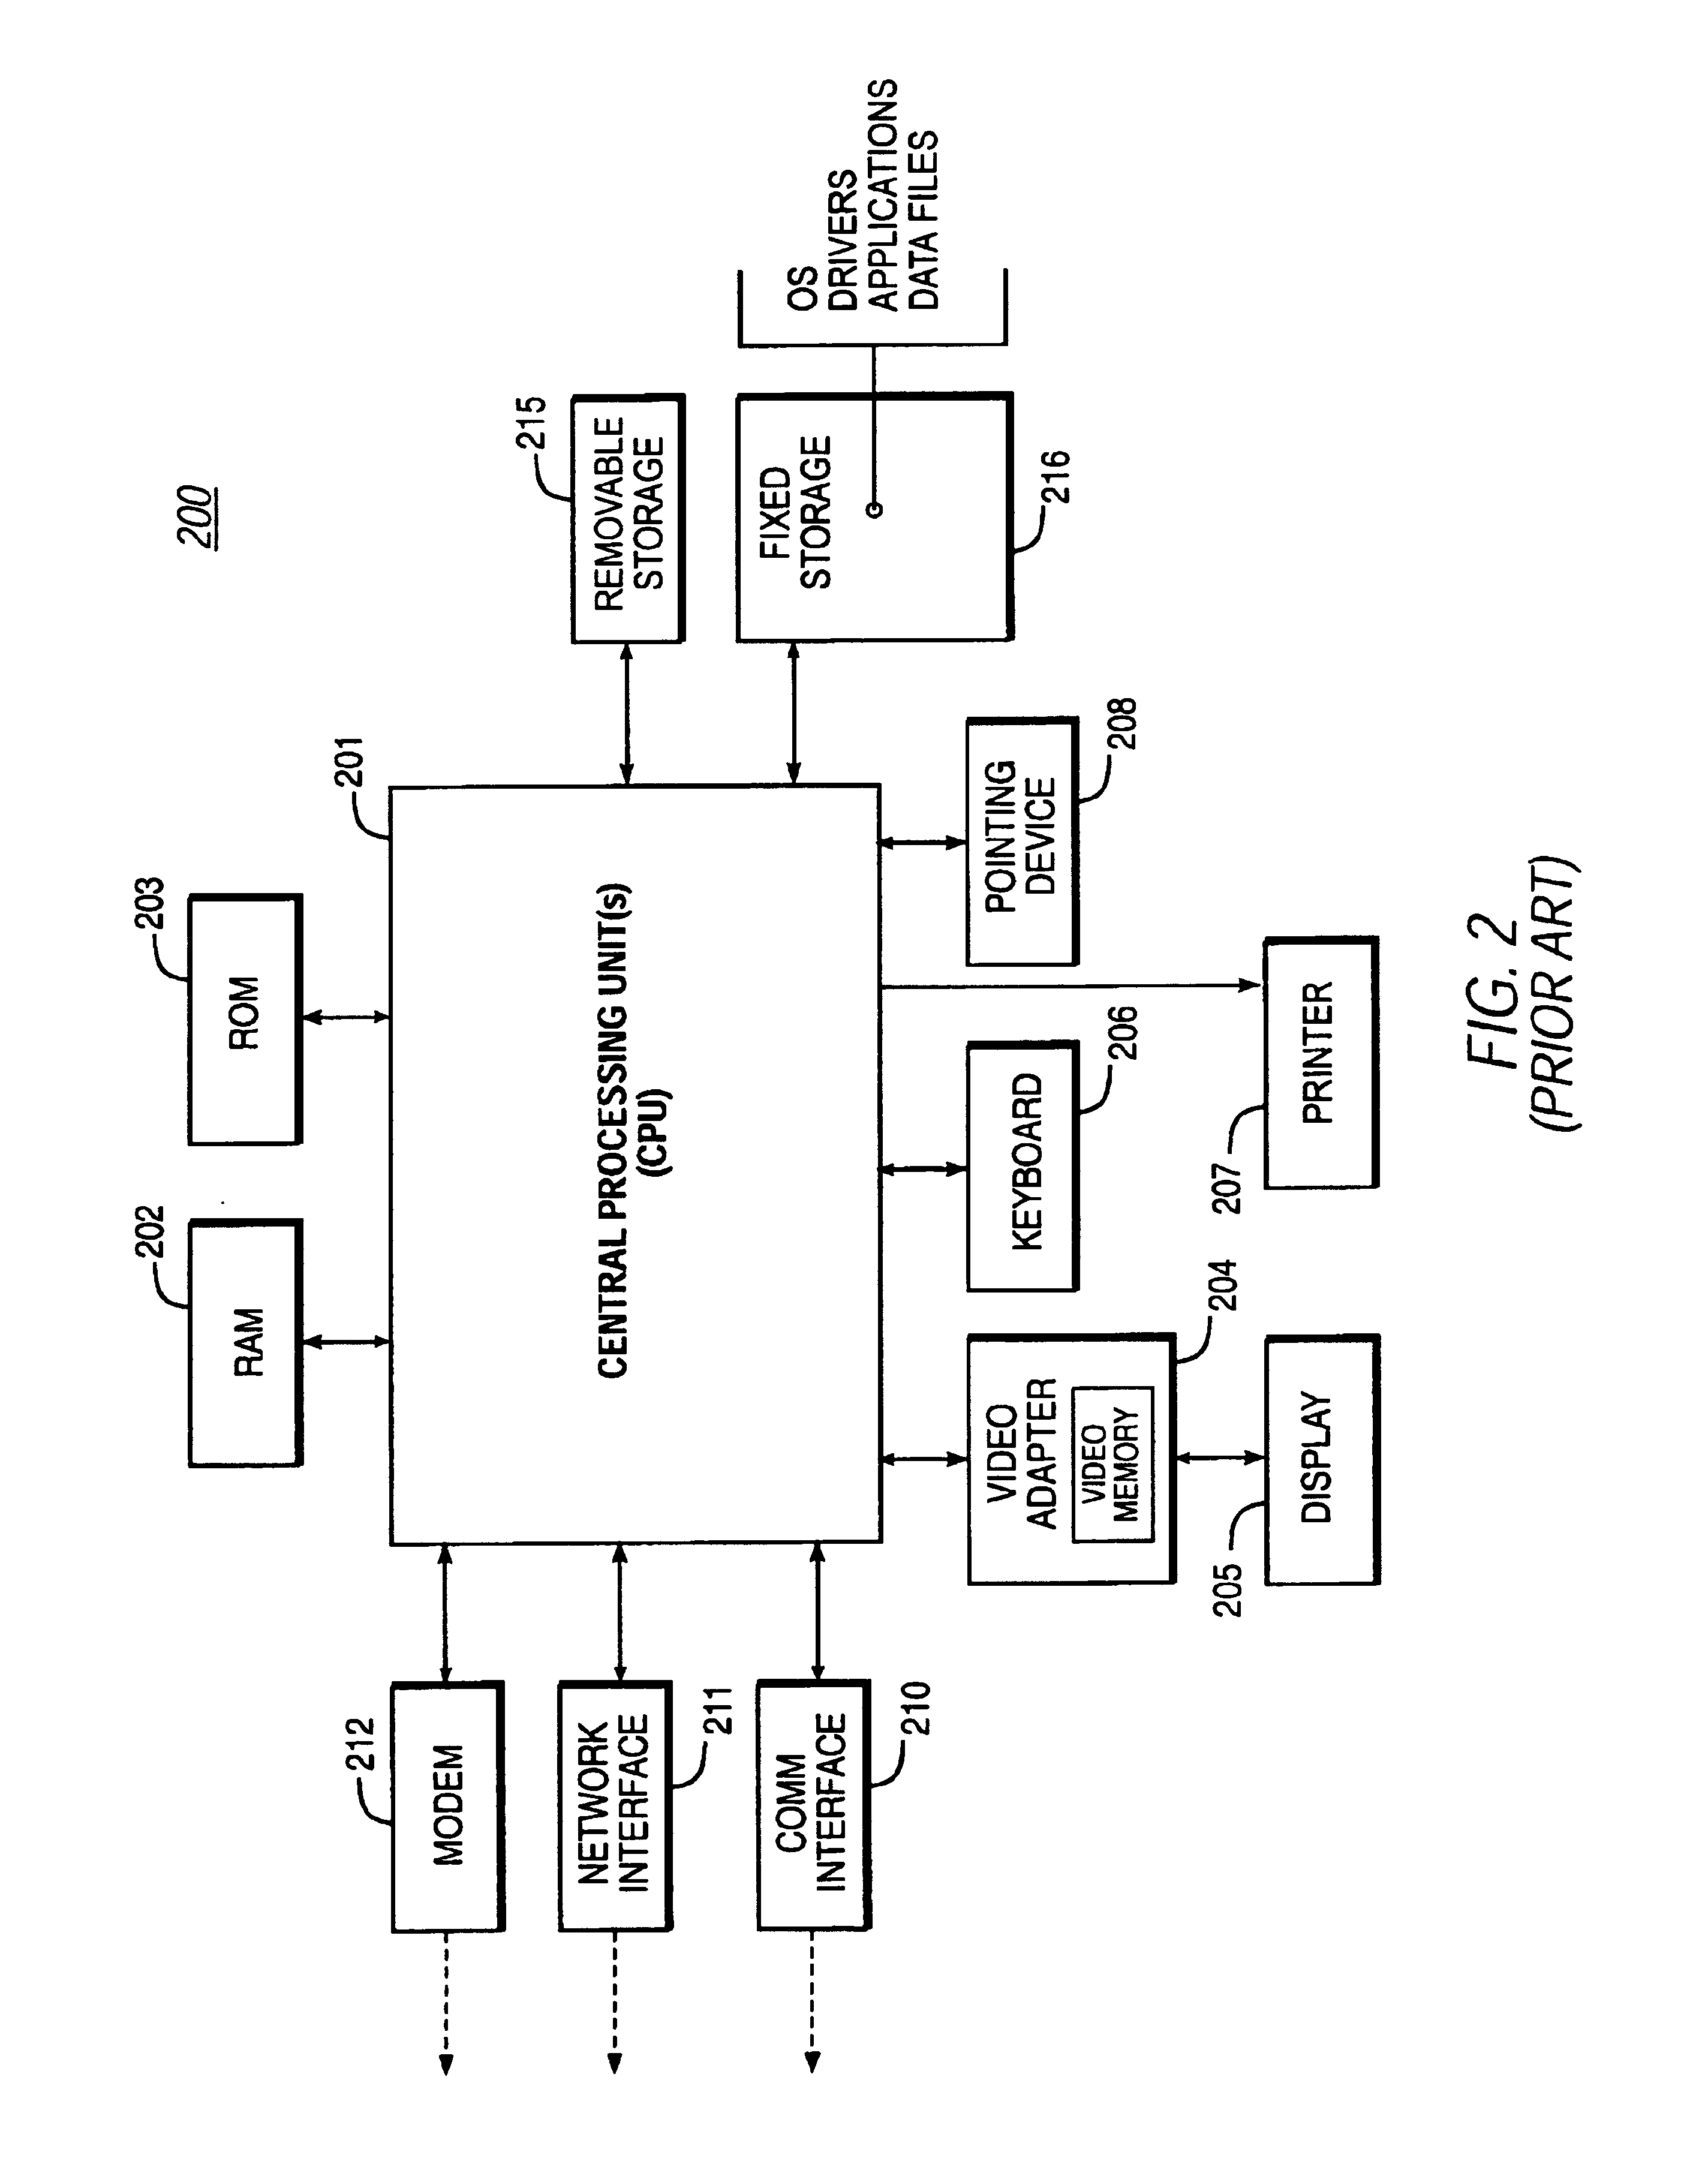 Electronic mail system with authentication methodology for supporting relaying in a message transfer agent